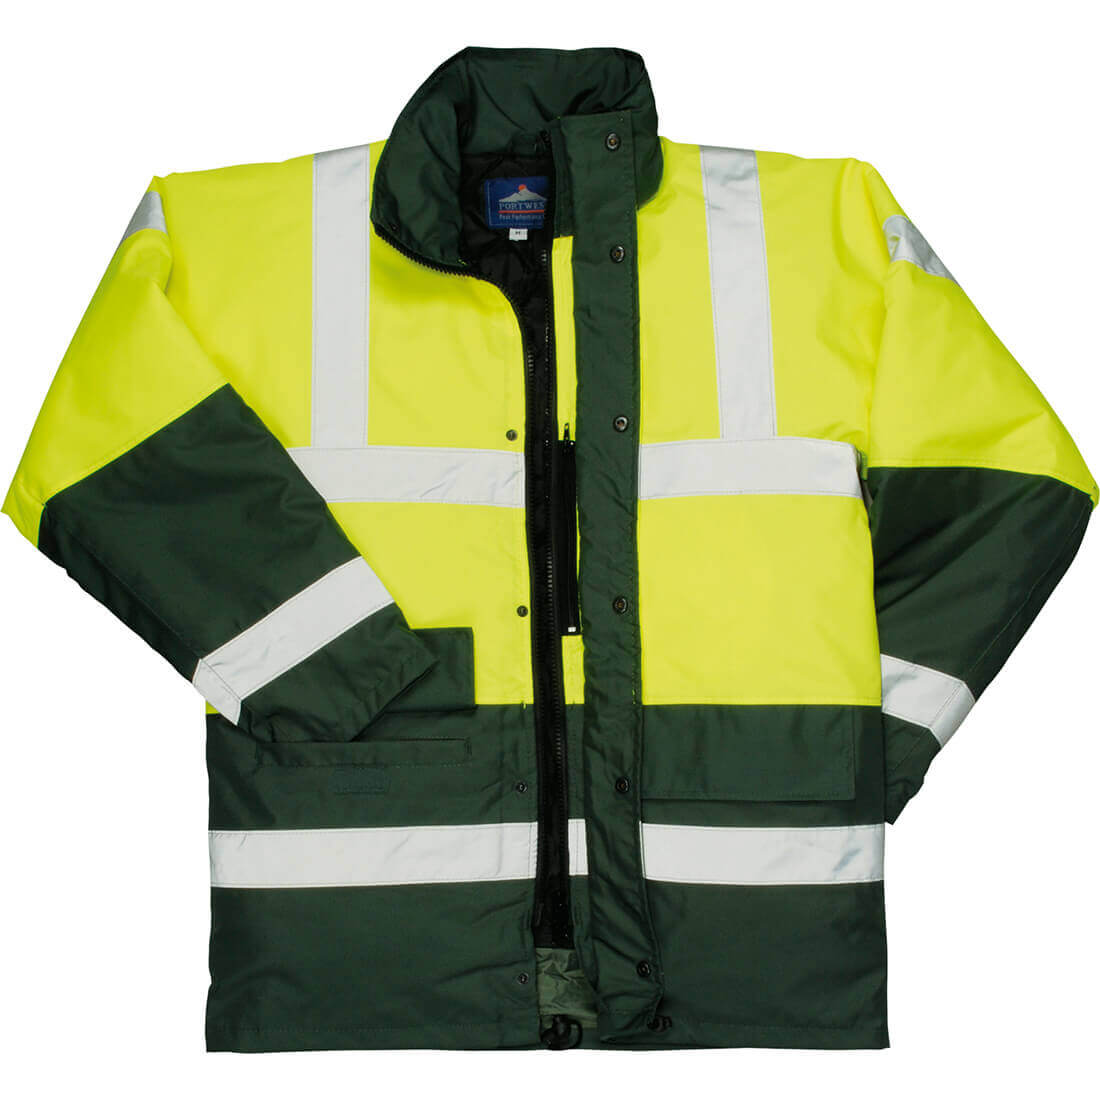 Image of Oxford Weave 300D Class 3 Hi Vis Contrast Traffic Jacket Yellow / Green 3XL